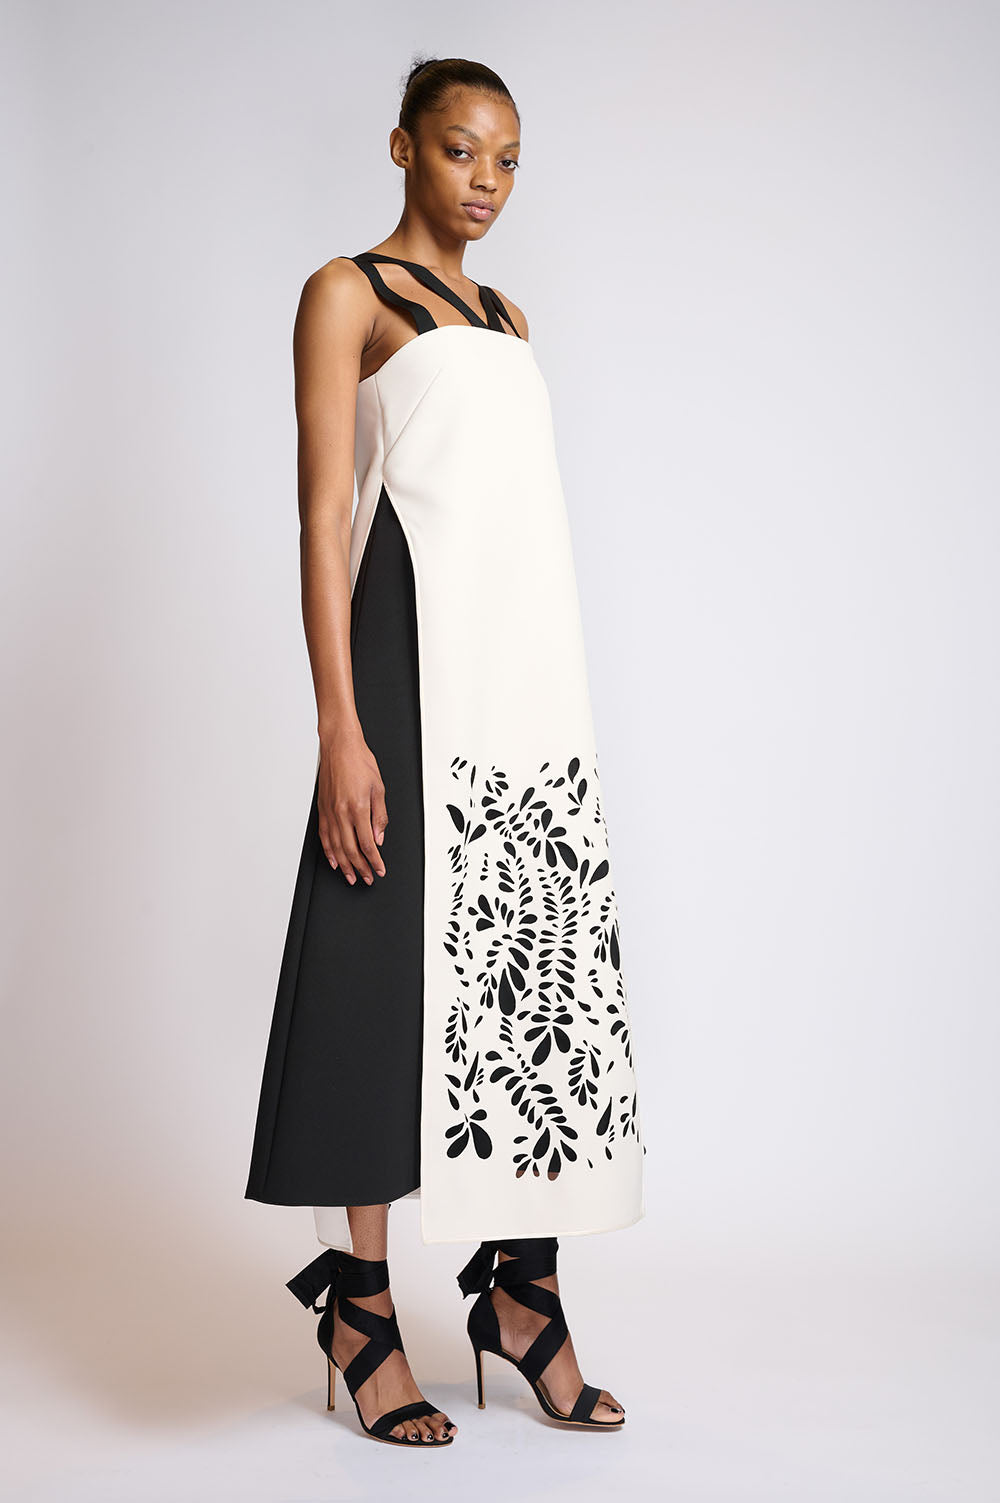 Porcelain and Onyx Cady Sheath Dress with Floral Precision Cut Overlay 2